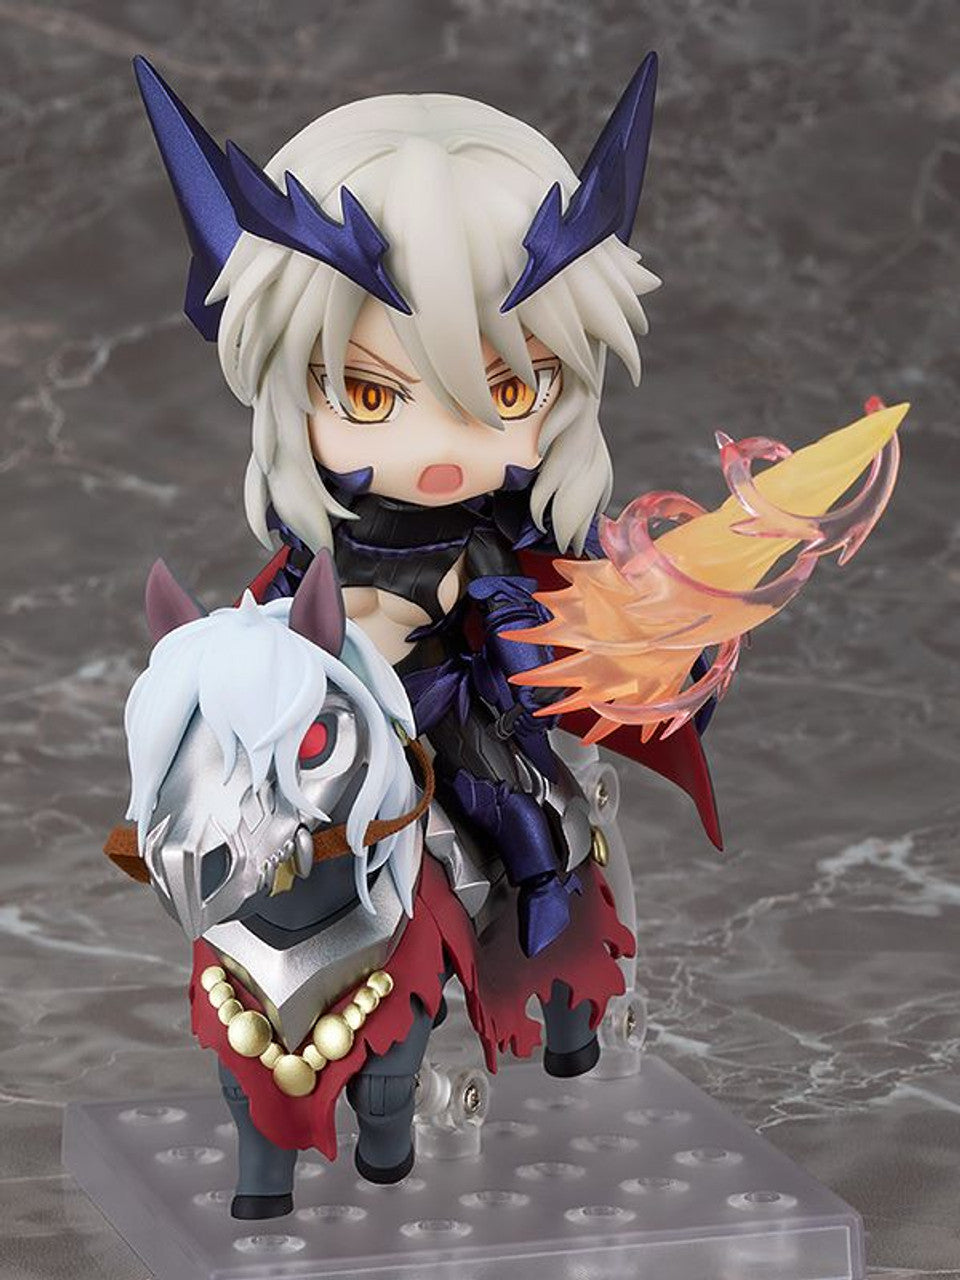 Fate/Grand Order Nendoroid [1868] &quot;Lancer/Altria Pendragon (Alter)&quot;-Good Smile Company-Ace Cards &amp; Collectibles